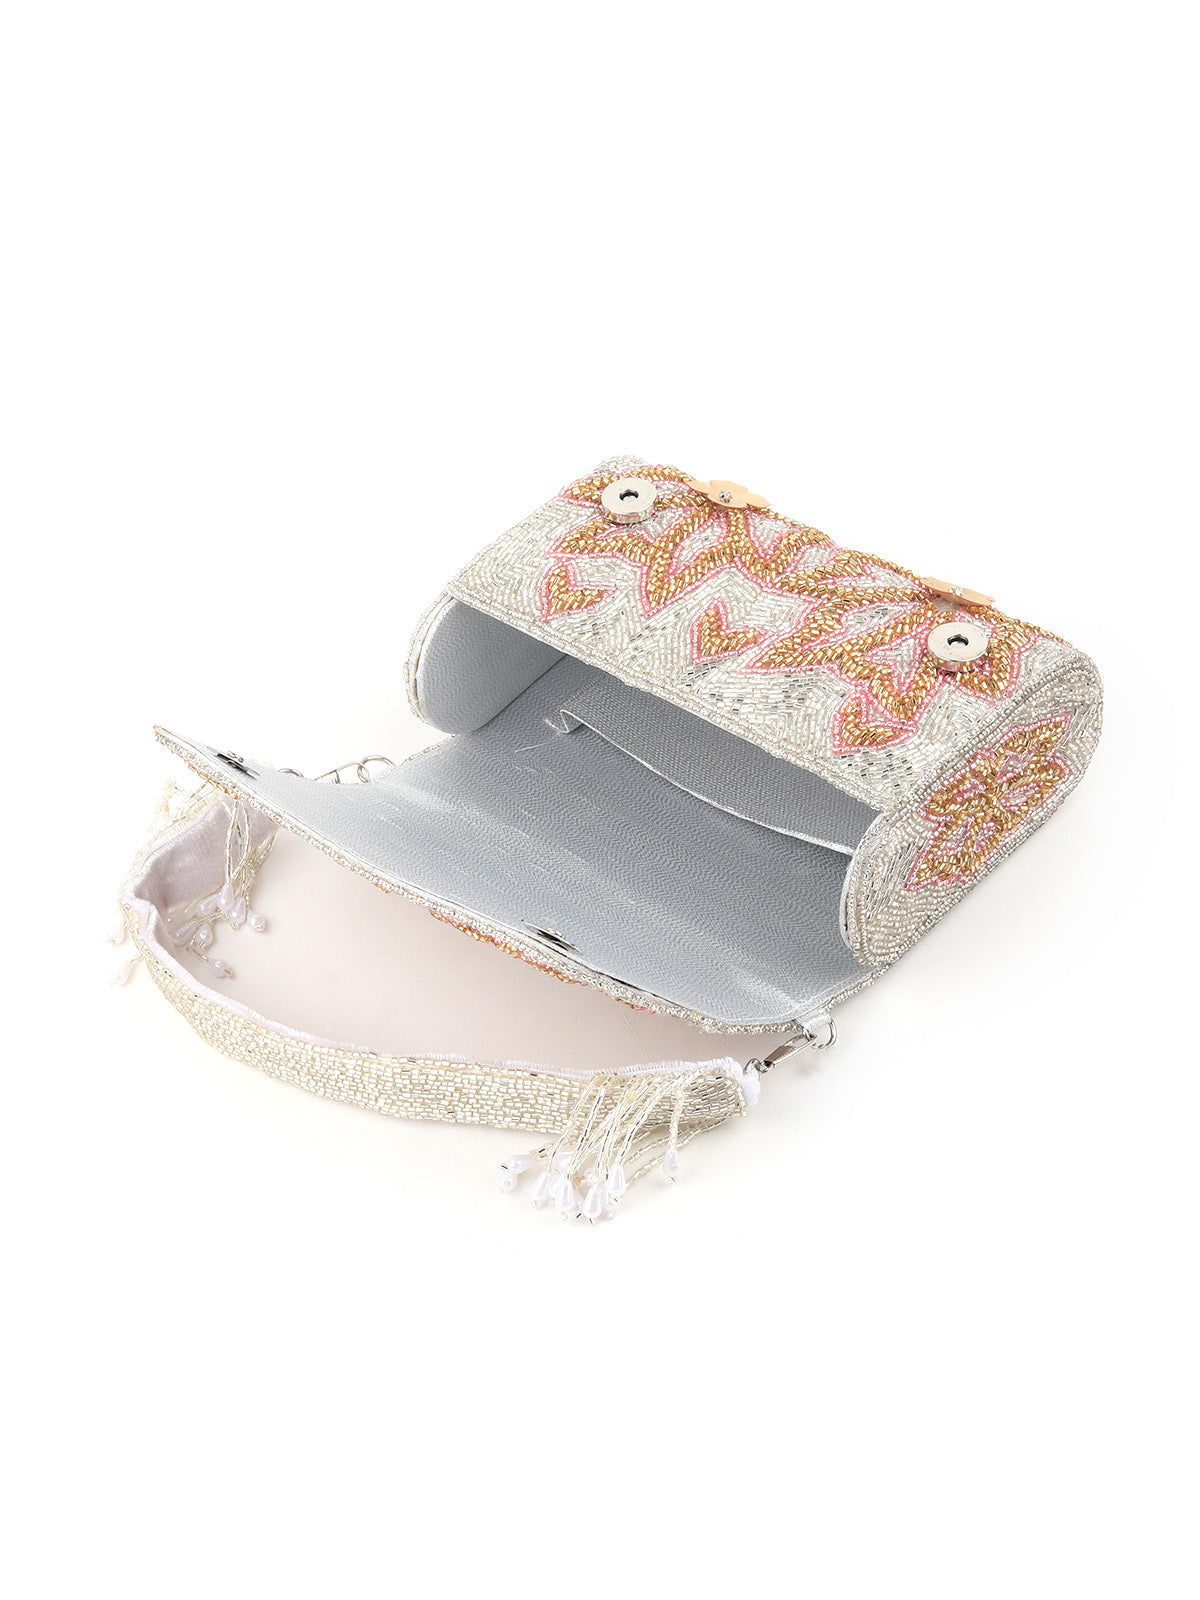 Odette - Sequenced Silver Fully Beaded Clutch